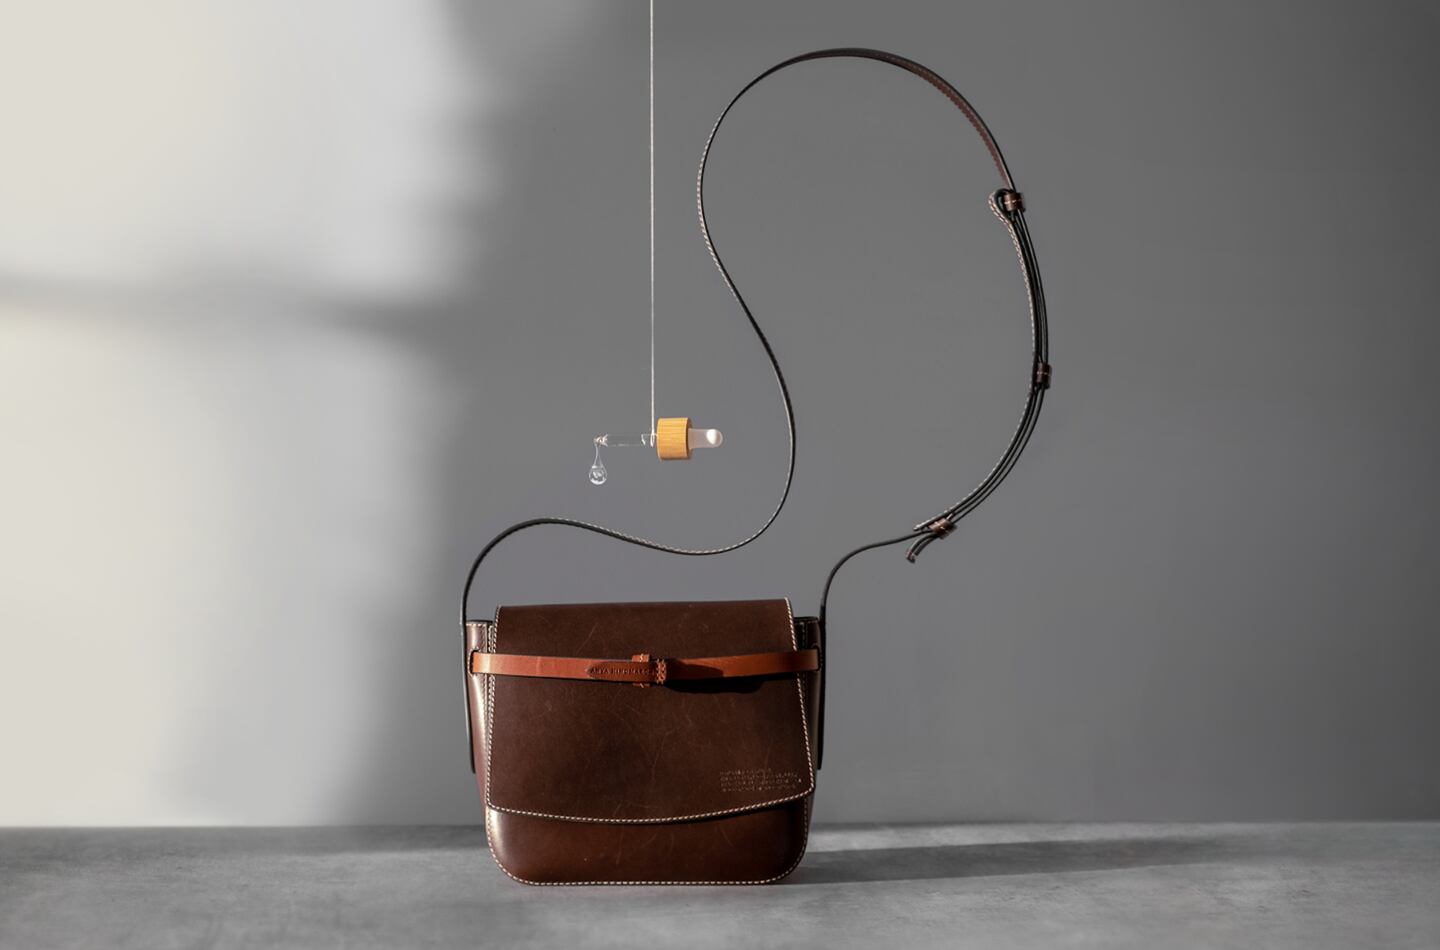 A leather handbag by Anya Hindmarch that uses Evolved By Nature's silk-based coating